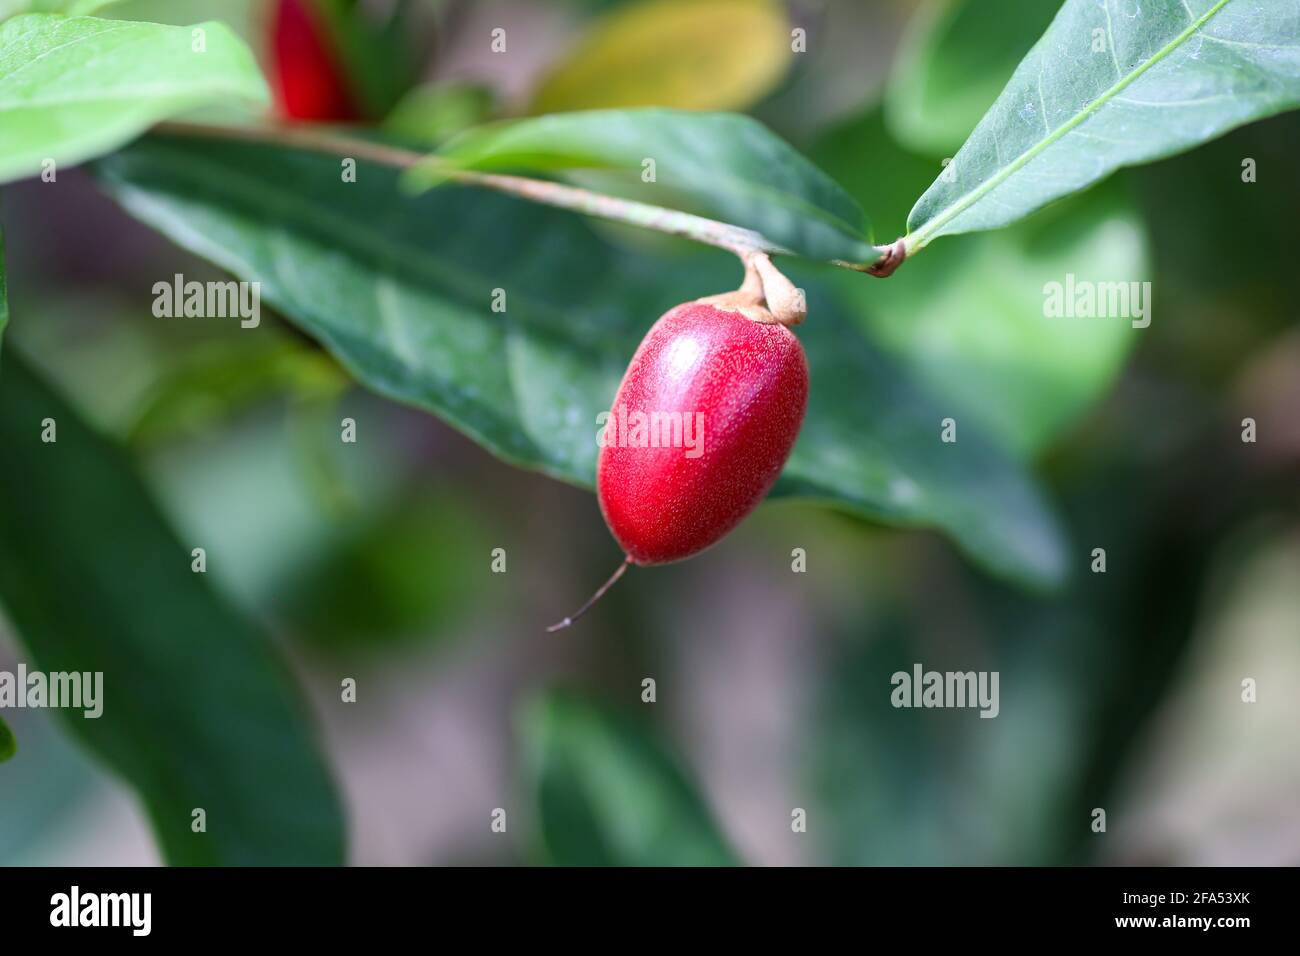 Synsepalum dulcificum is a plant known for its berry that, when eaten, causes sour foods subsequently consumed to taste sweet. Stock Photo